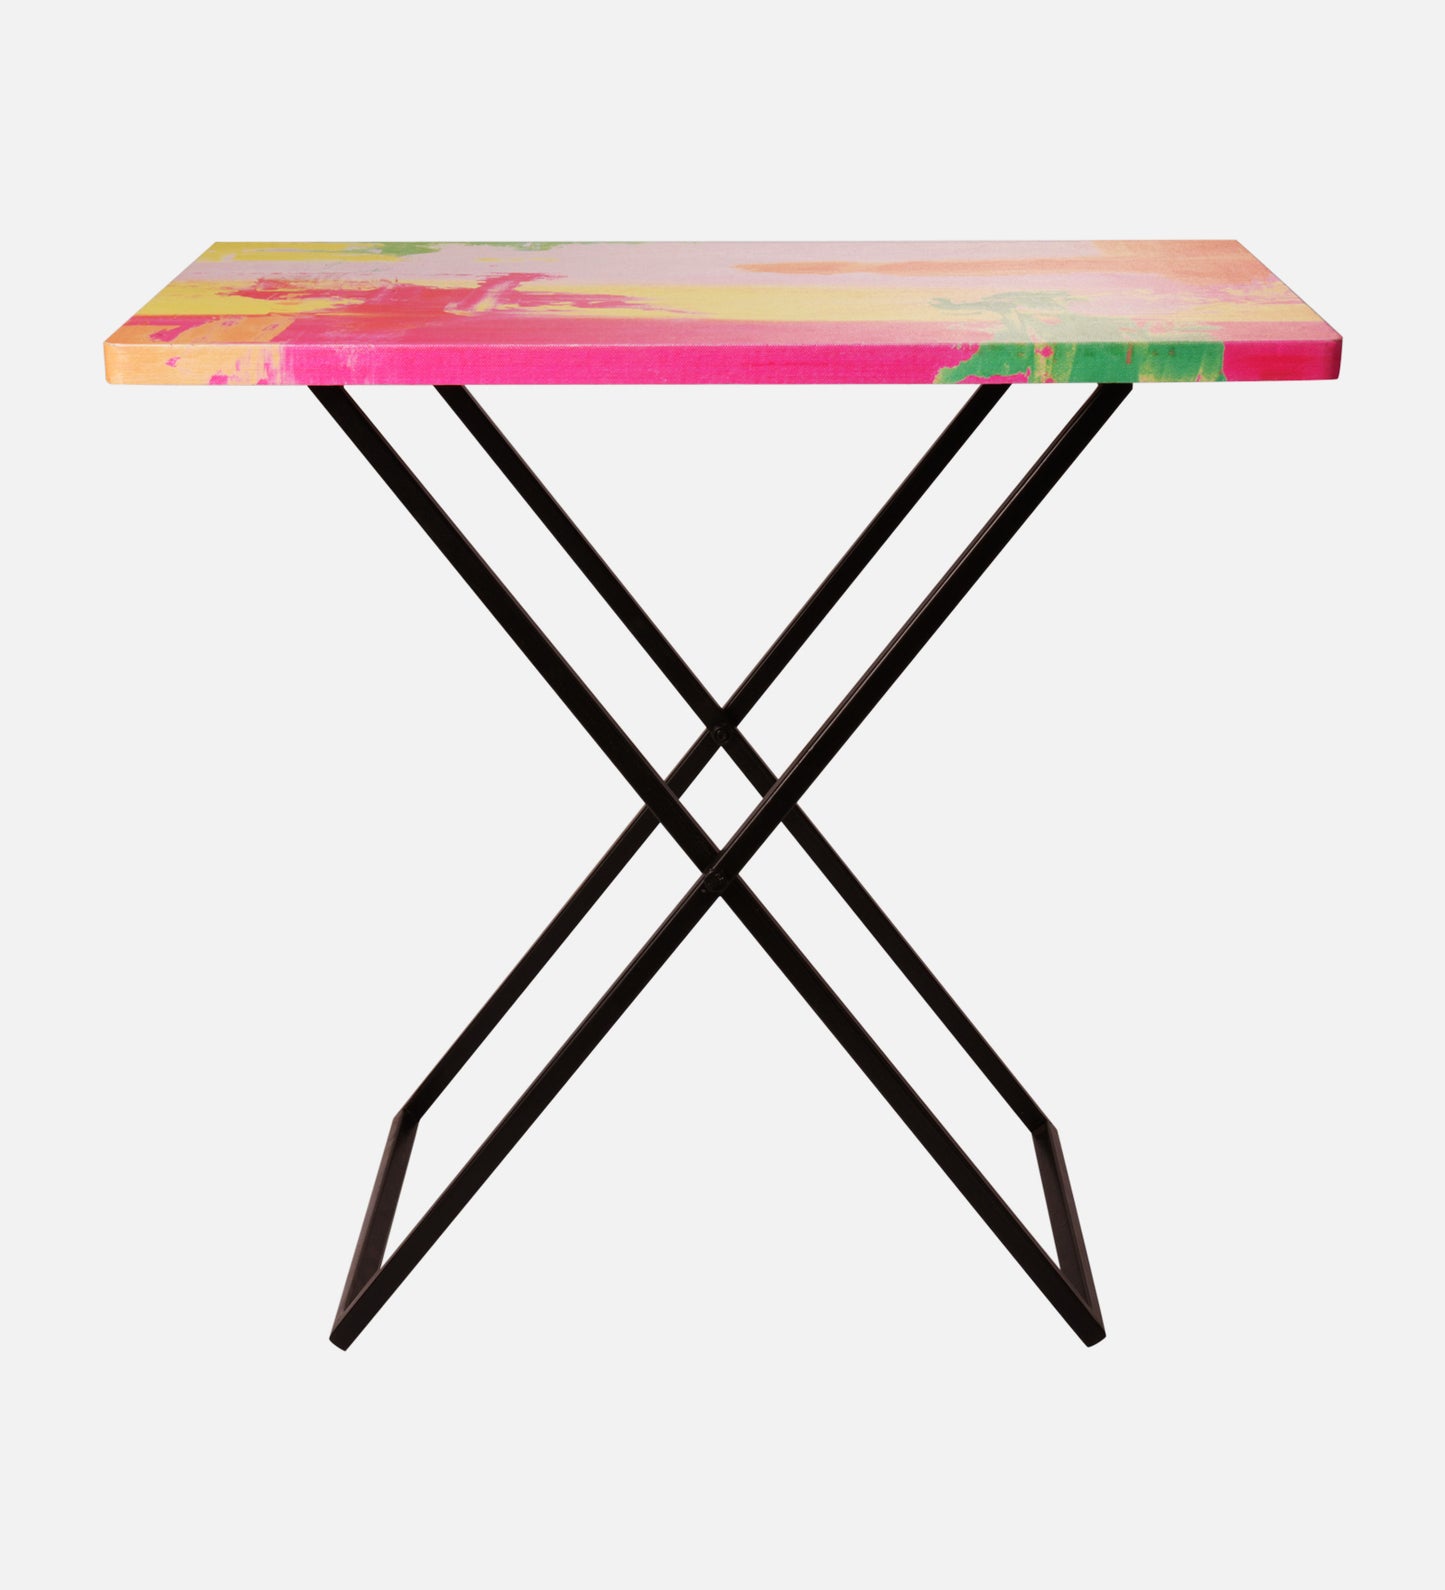 Neon Criss Cross Side Tables, Writing Tables, Wooden Tables, Kids Tables, End Tables Living Room Decor by A Tiny Mistake